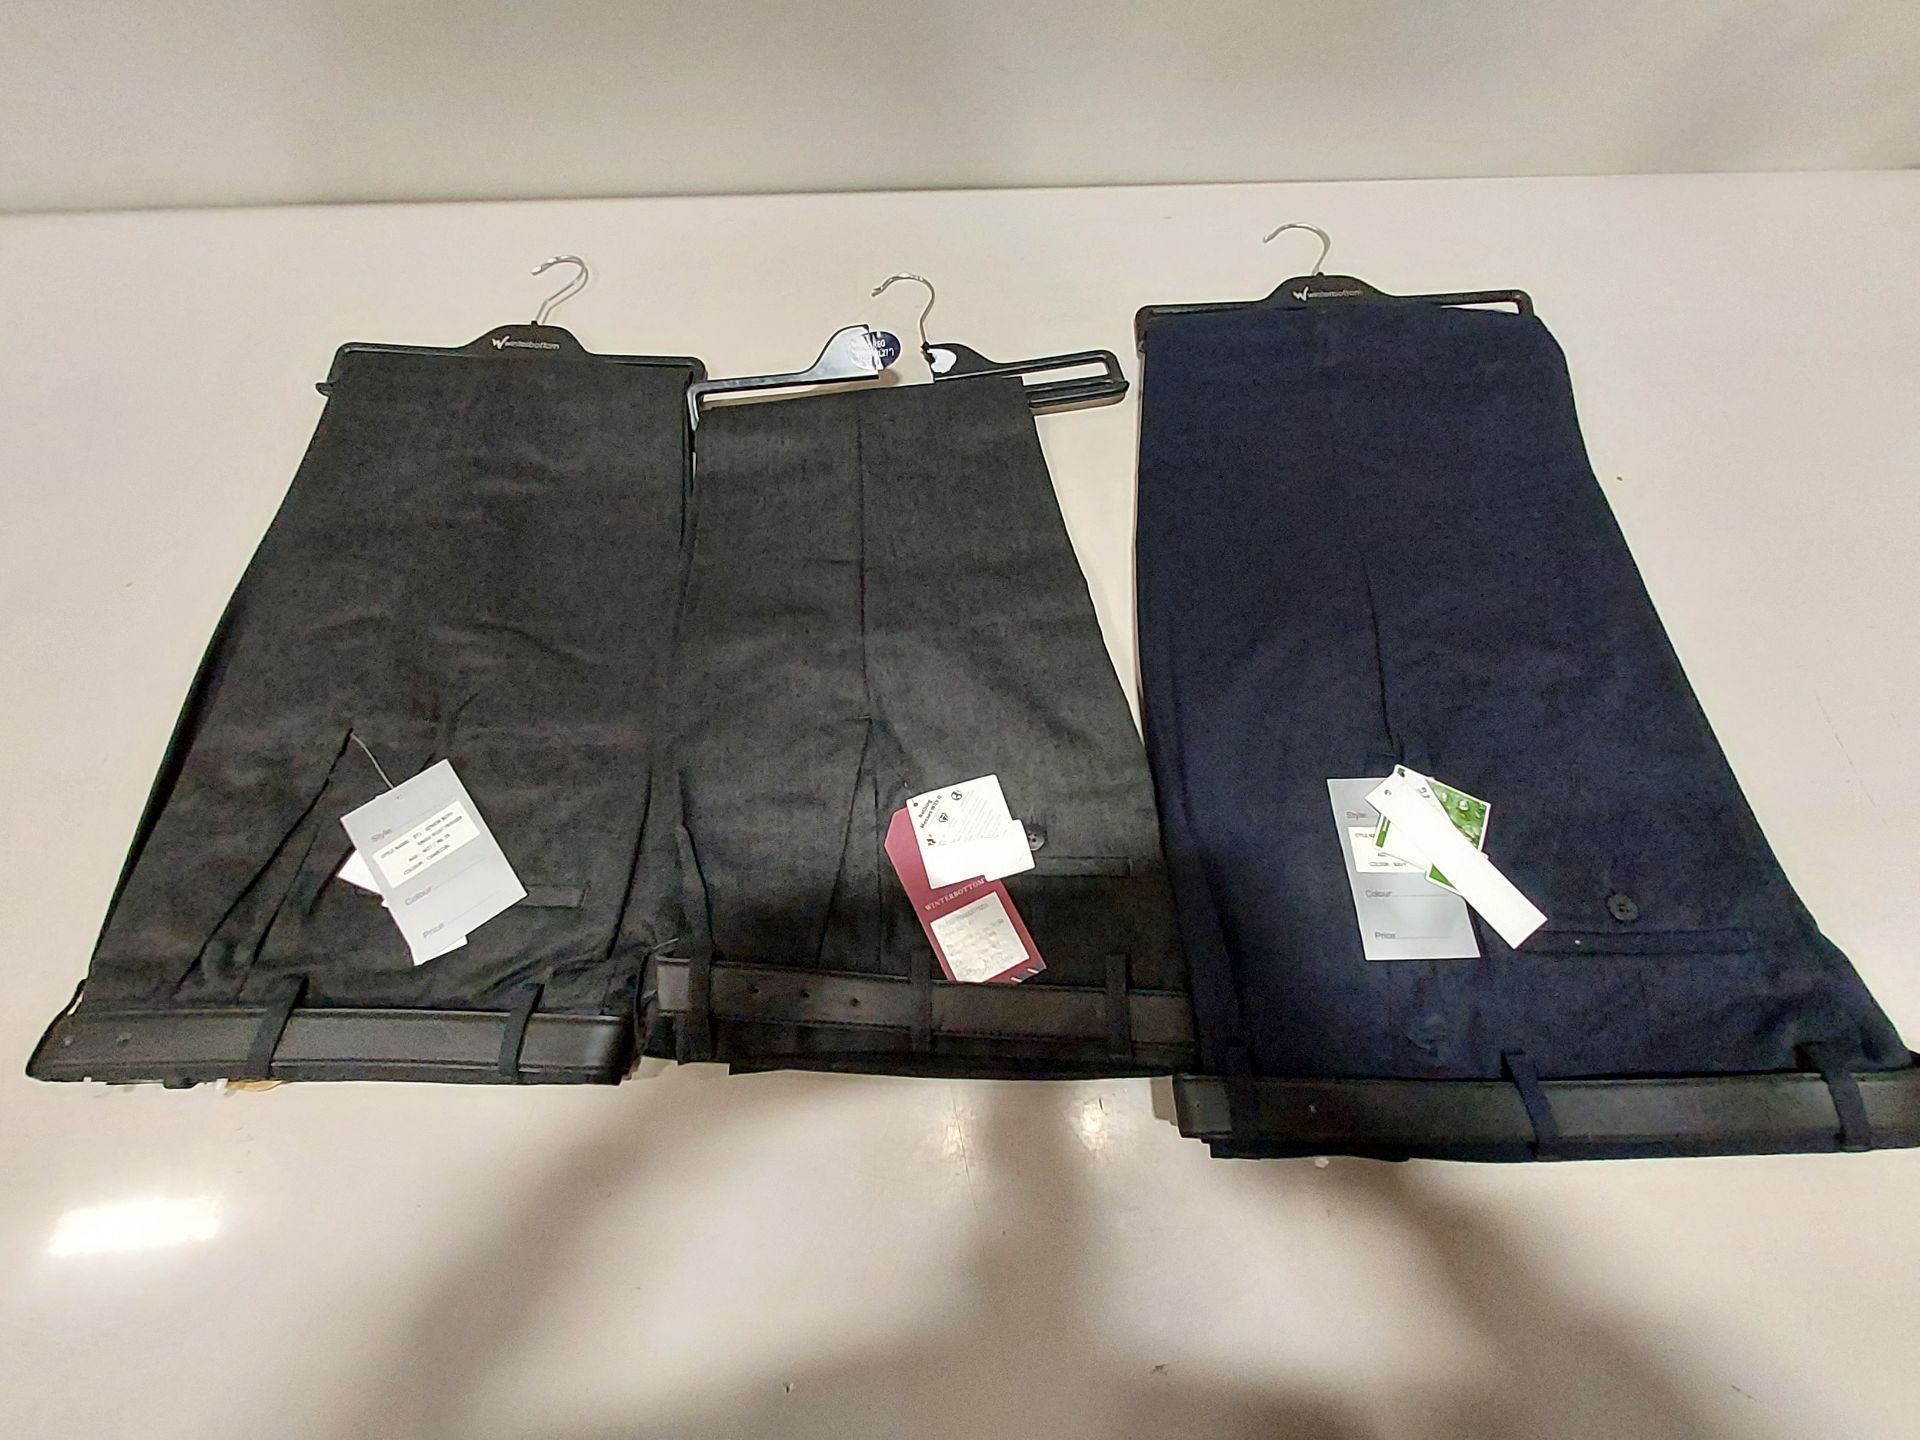 100 + PIECE MIXED WINTERBOTTOMS TROUSERS LOT IN VARIOUS COLOURS AND SIZES IE. CHARCOAL, NAVY AND